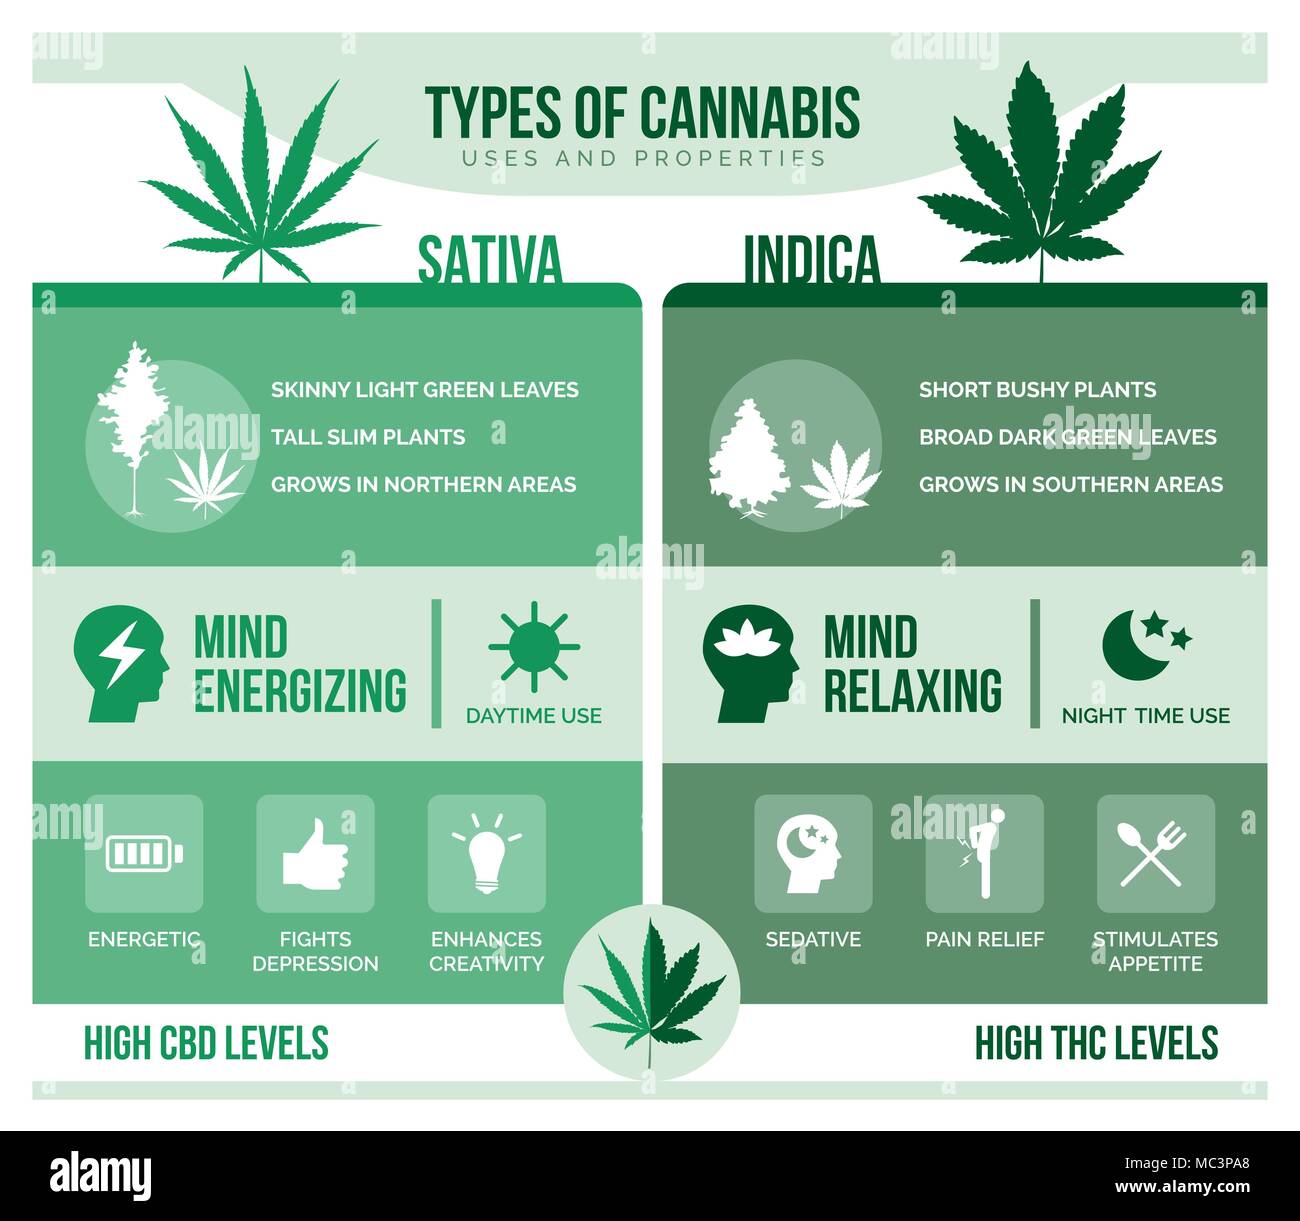 Cannabis sativa and cannabis indica: differencies and health benefits infographic Stock Vector